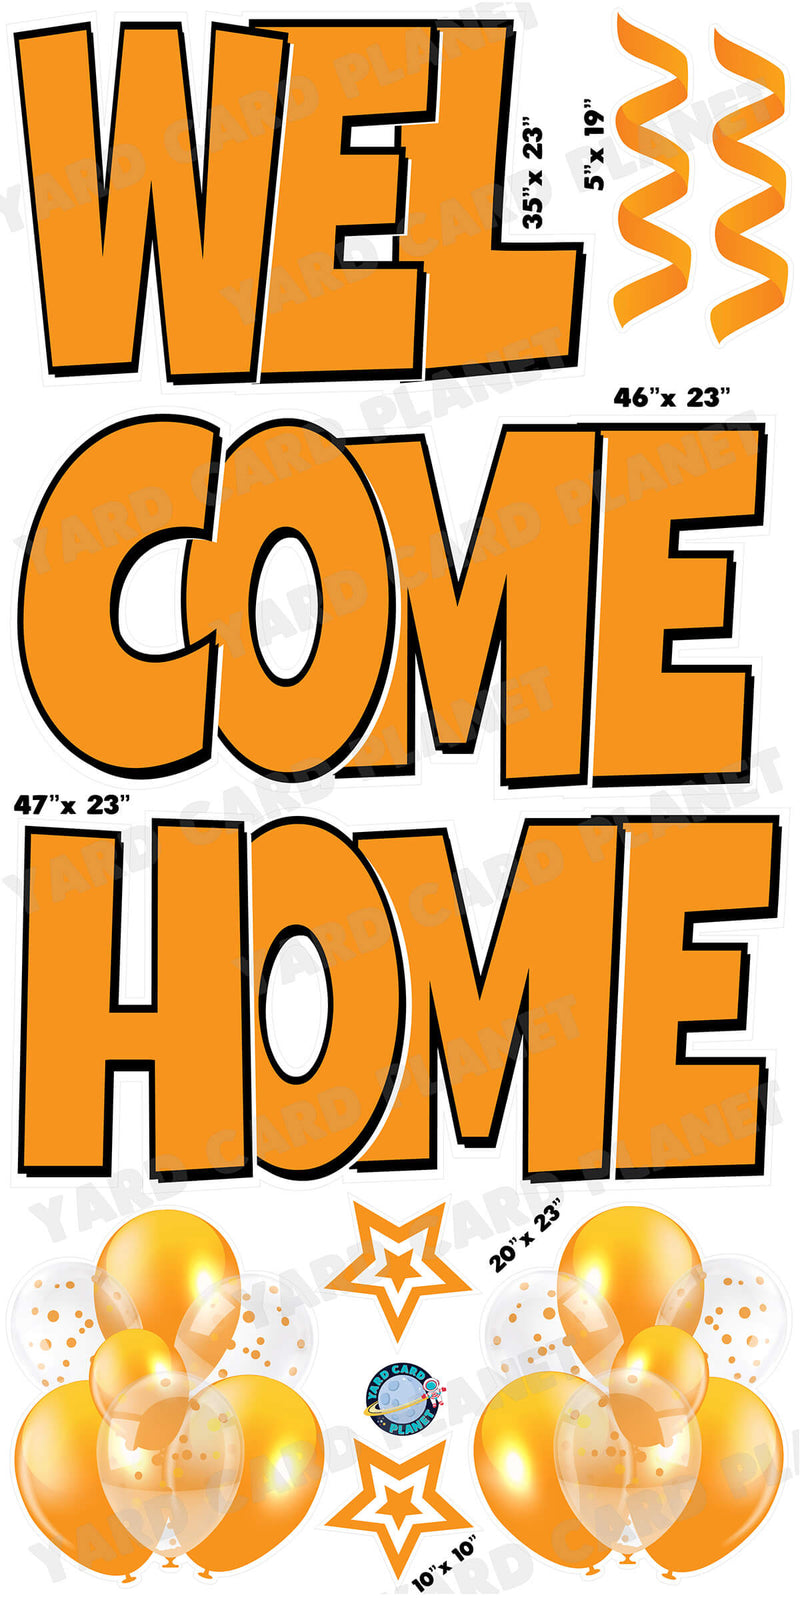 Large 23" Welcome Home Yard Card EZ Quick Sets in Luckiest Guy Font and Flair in Orange Solid Color